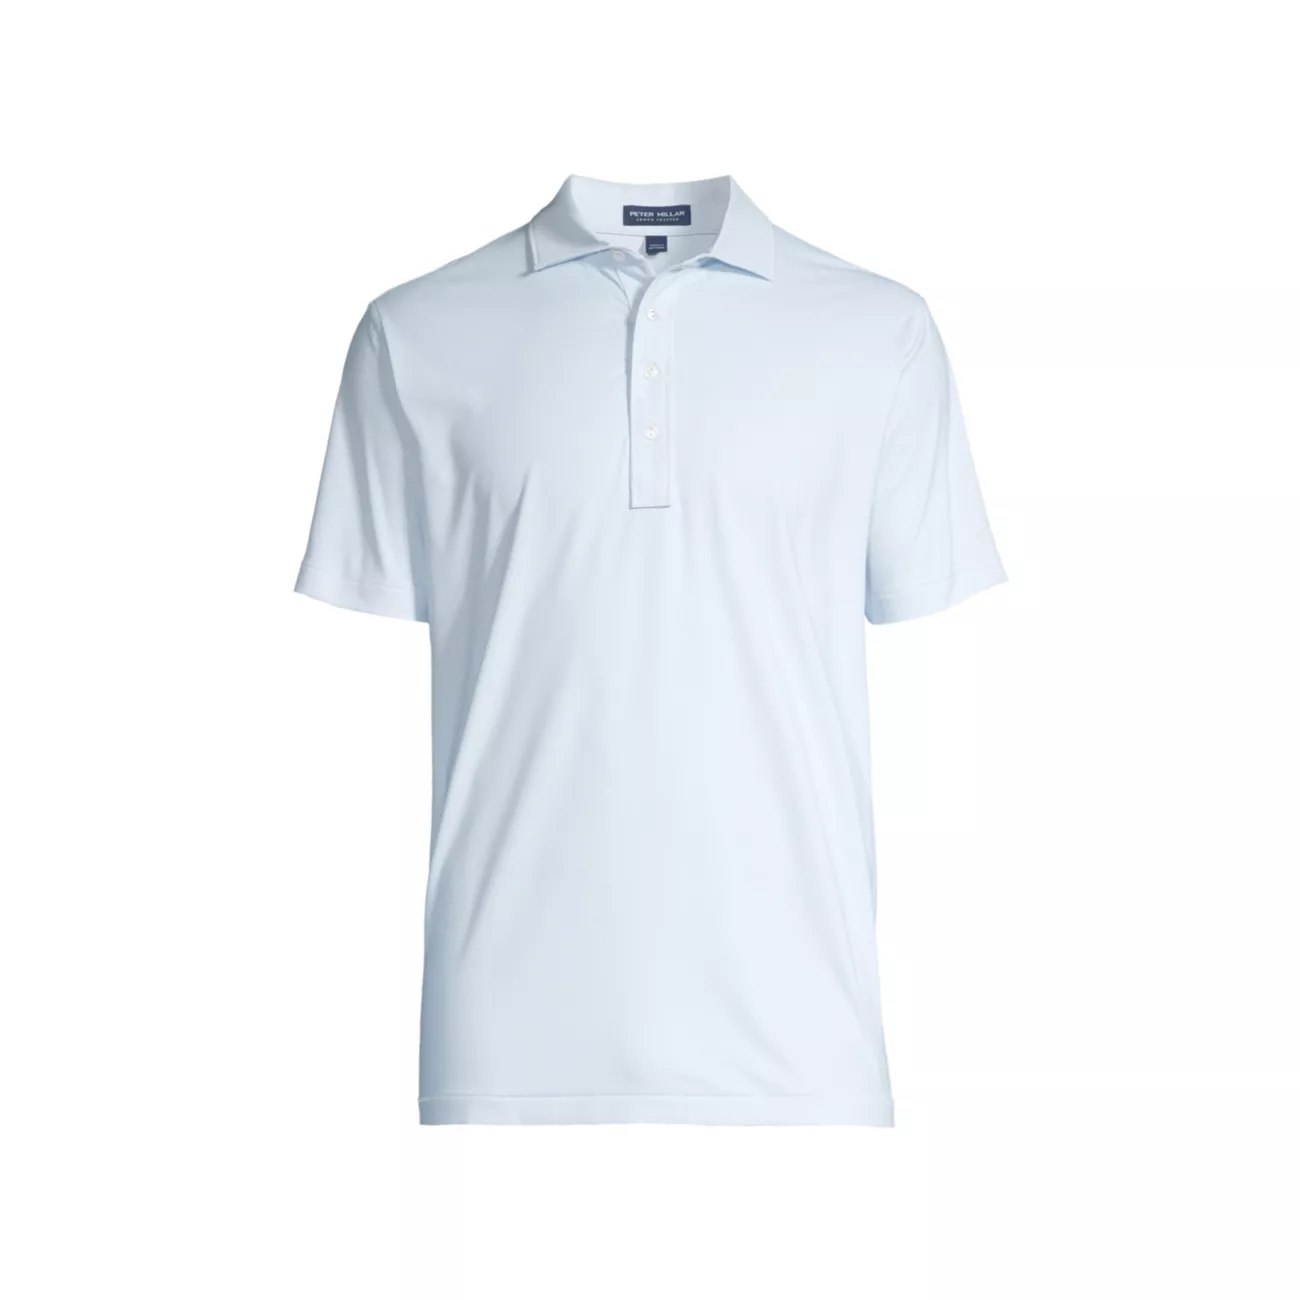 Crown Crafted Regent Geo Performance Polo Shirt Peter Millar